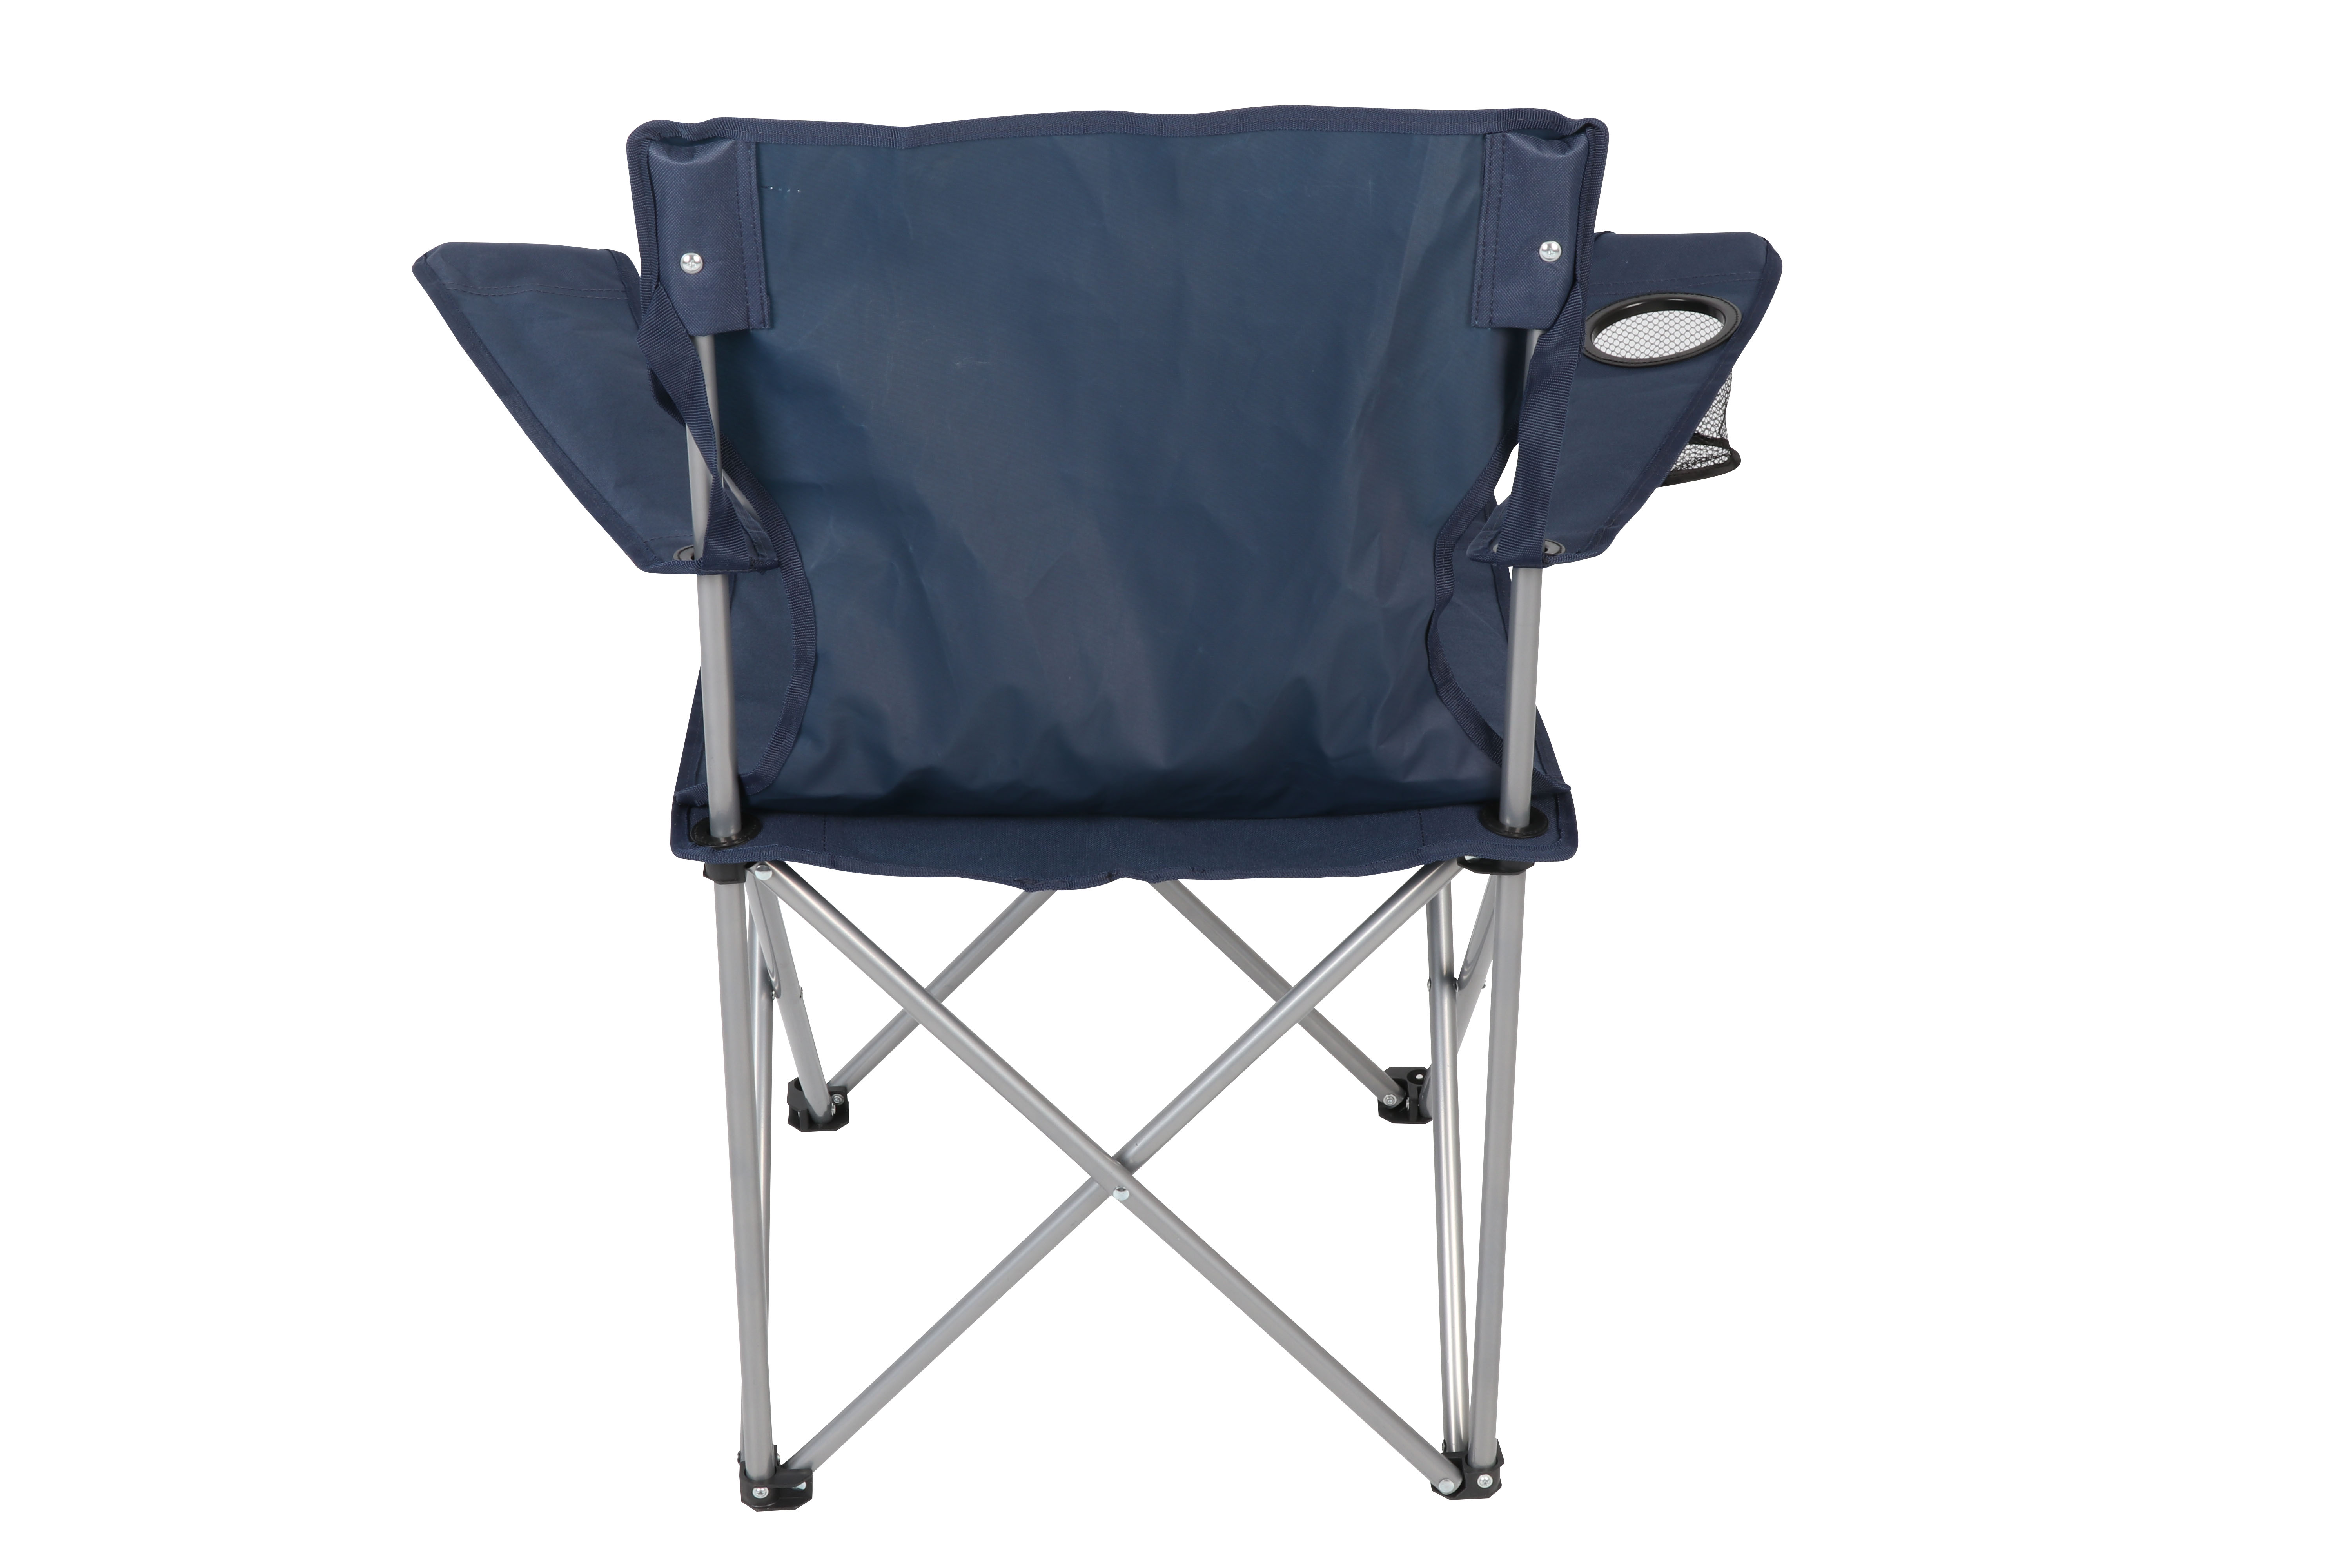 Ozark Trail Camping Chair, Blue, 4 and Half Pounds - image 5 of 13